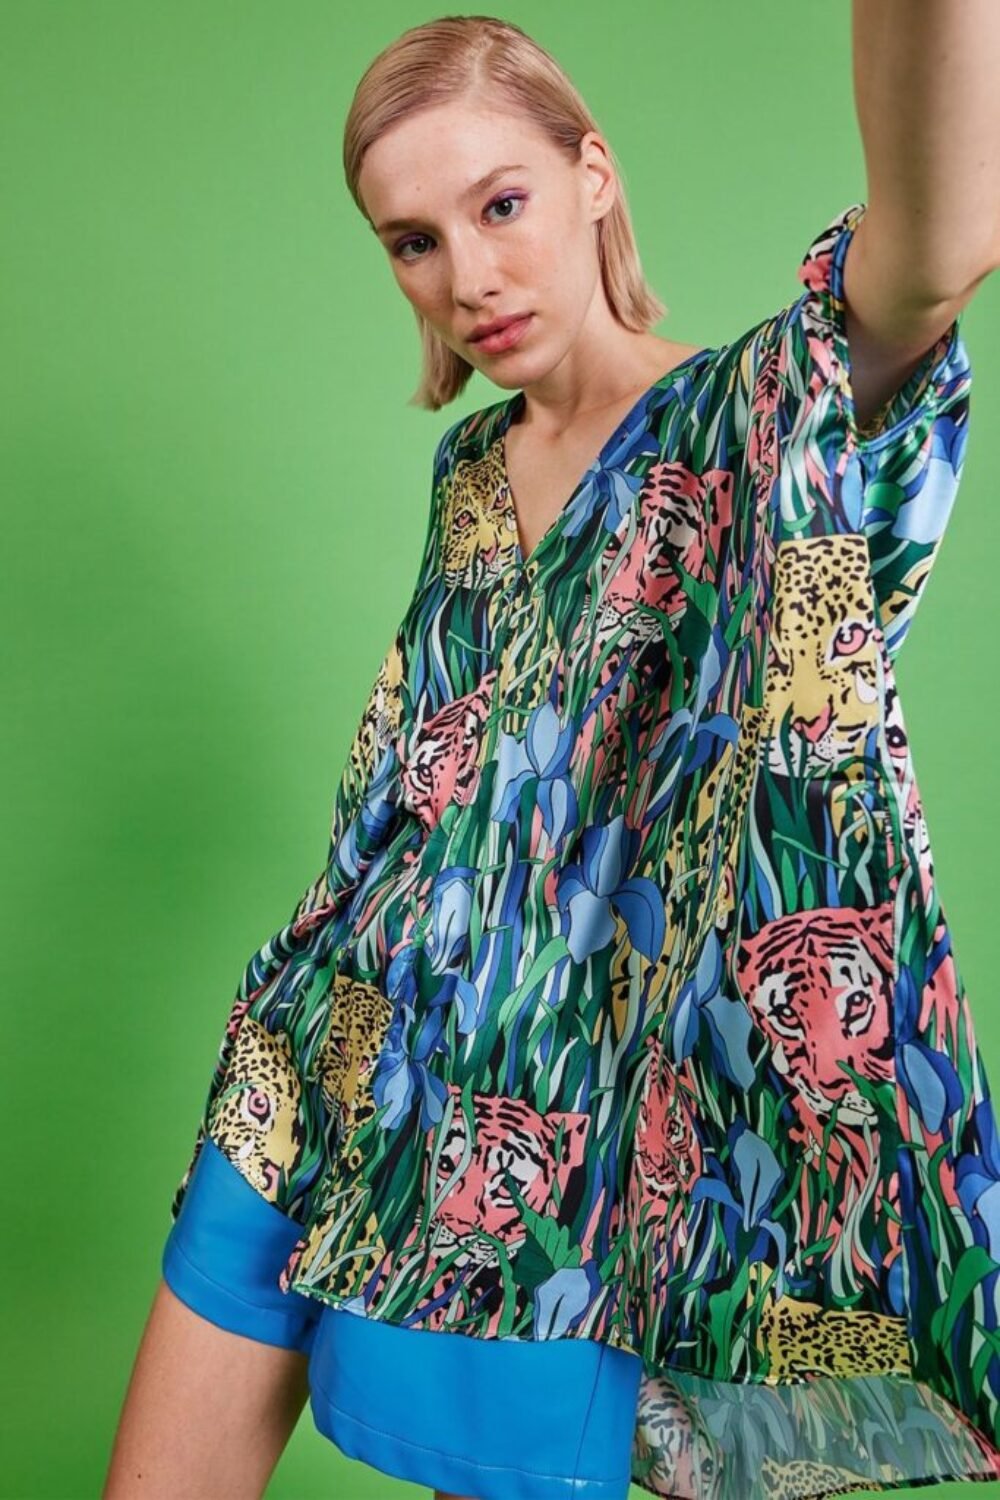 Shop Lux Floral Shirt Dress and women's luxury and designer clothes at www.lux-apparel.co.uk